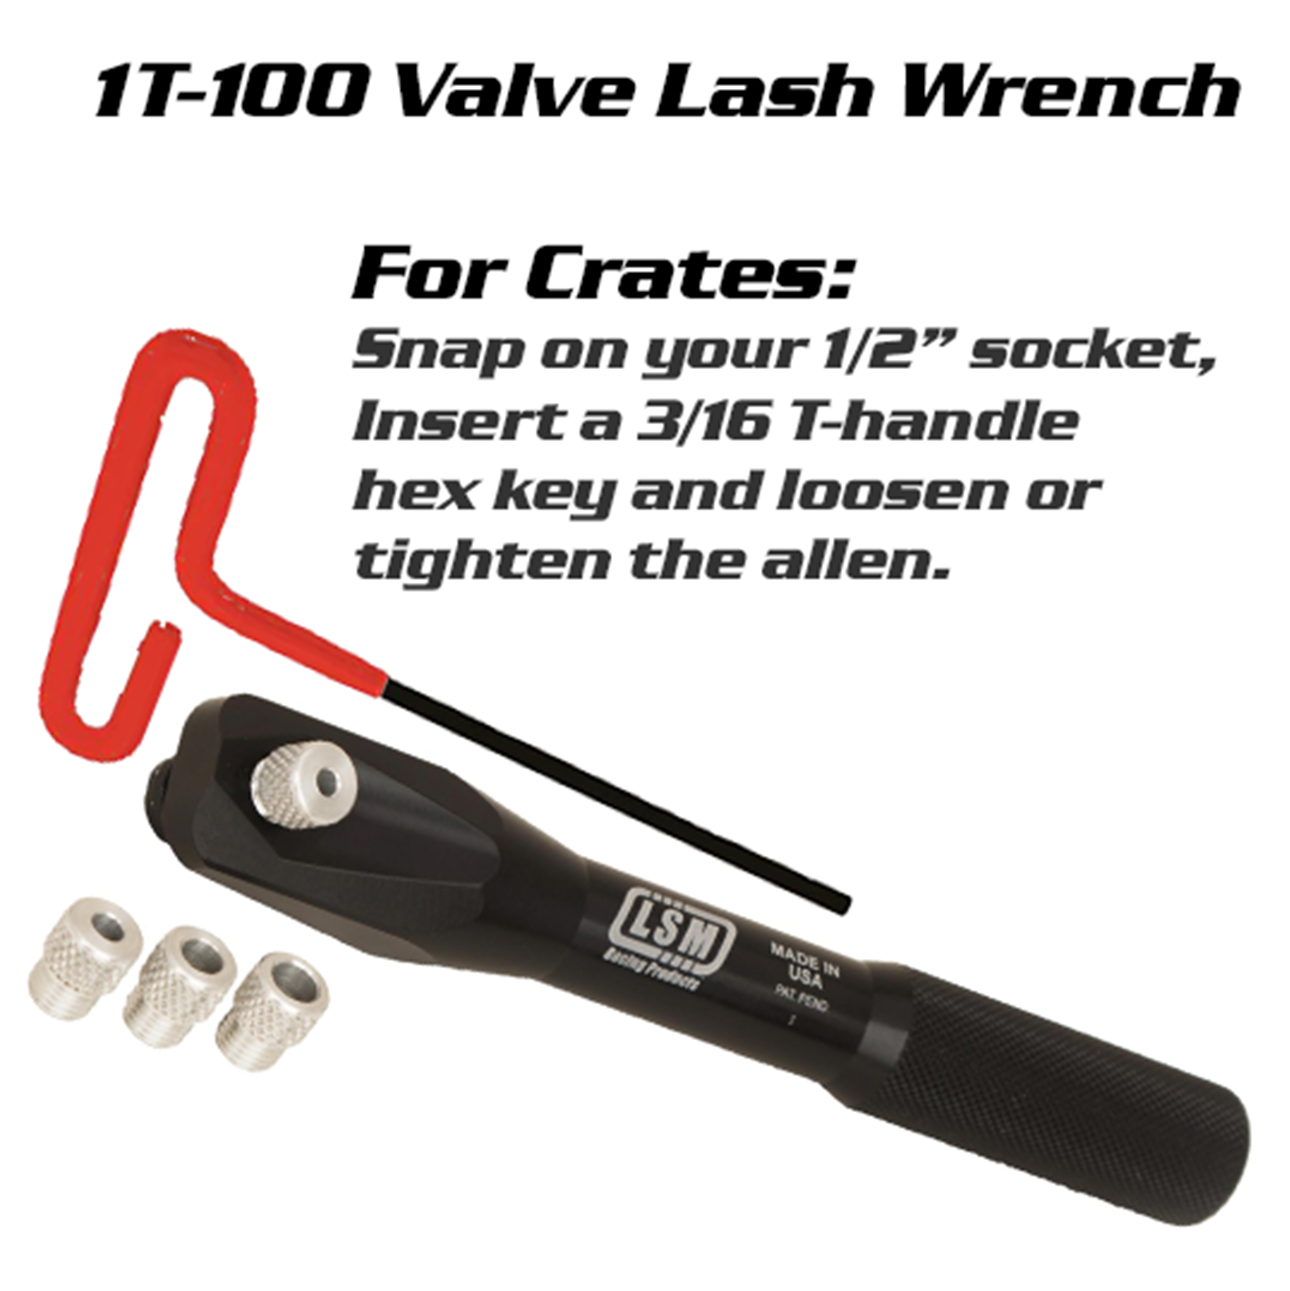 1T-100 Valve Lash Wrench with 3/16 T-Handle